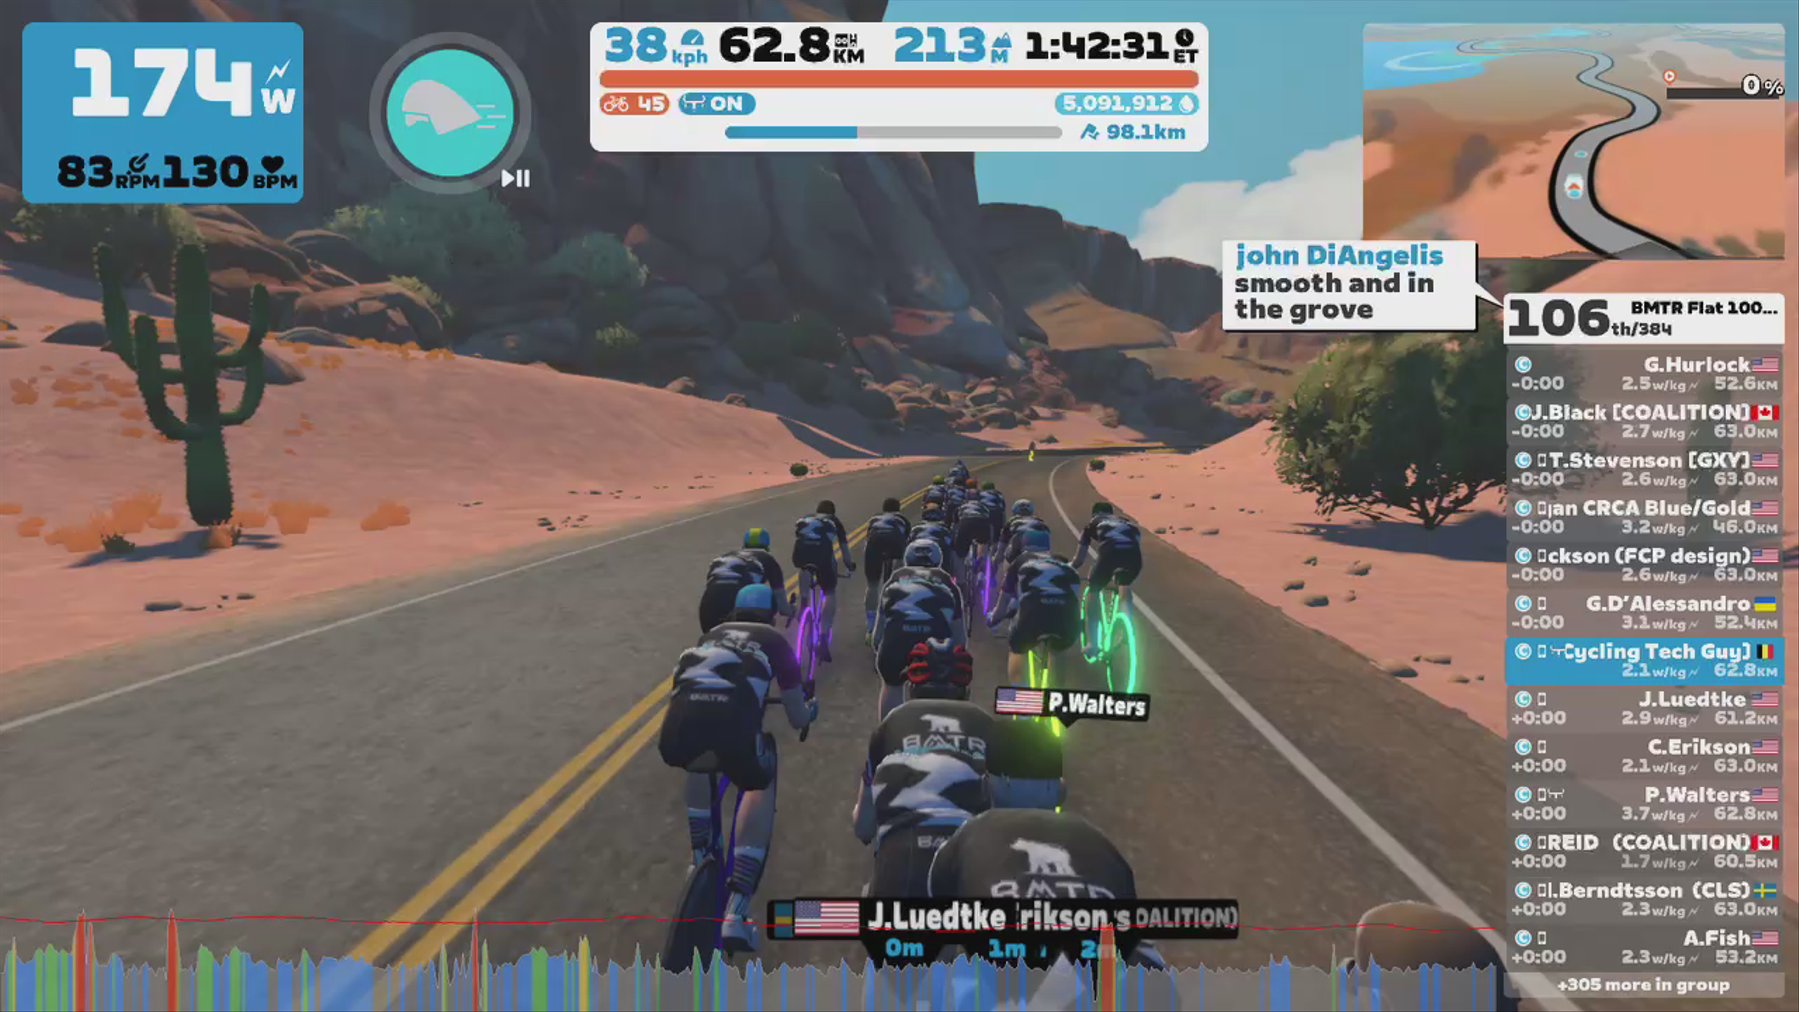 Zwift - Group Ride: BMTR Flat 100 (Miles) (C) on Big Flat 8 in Watopia